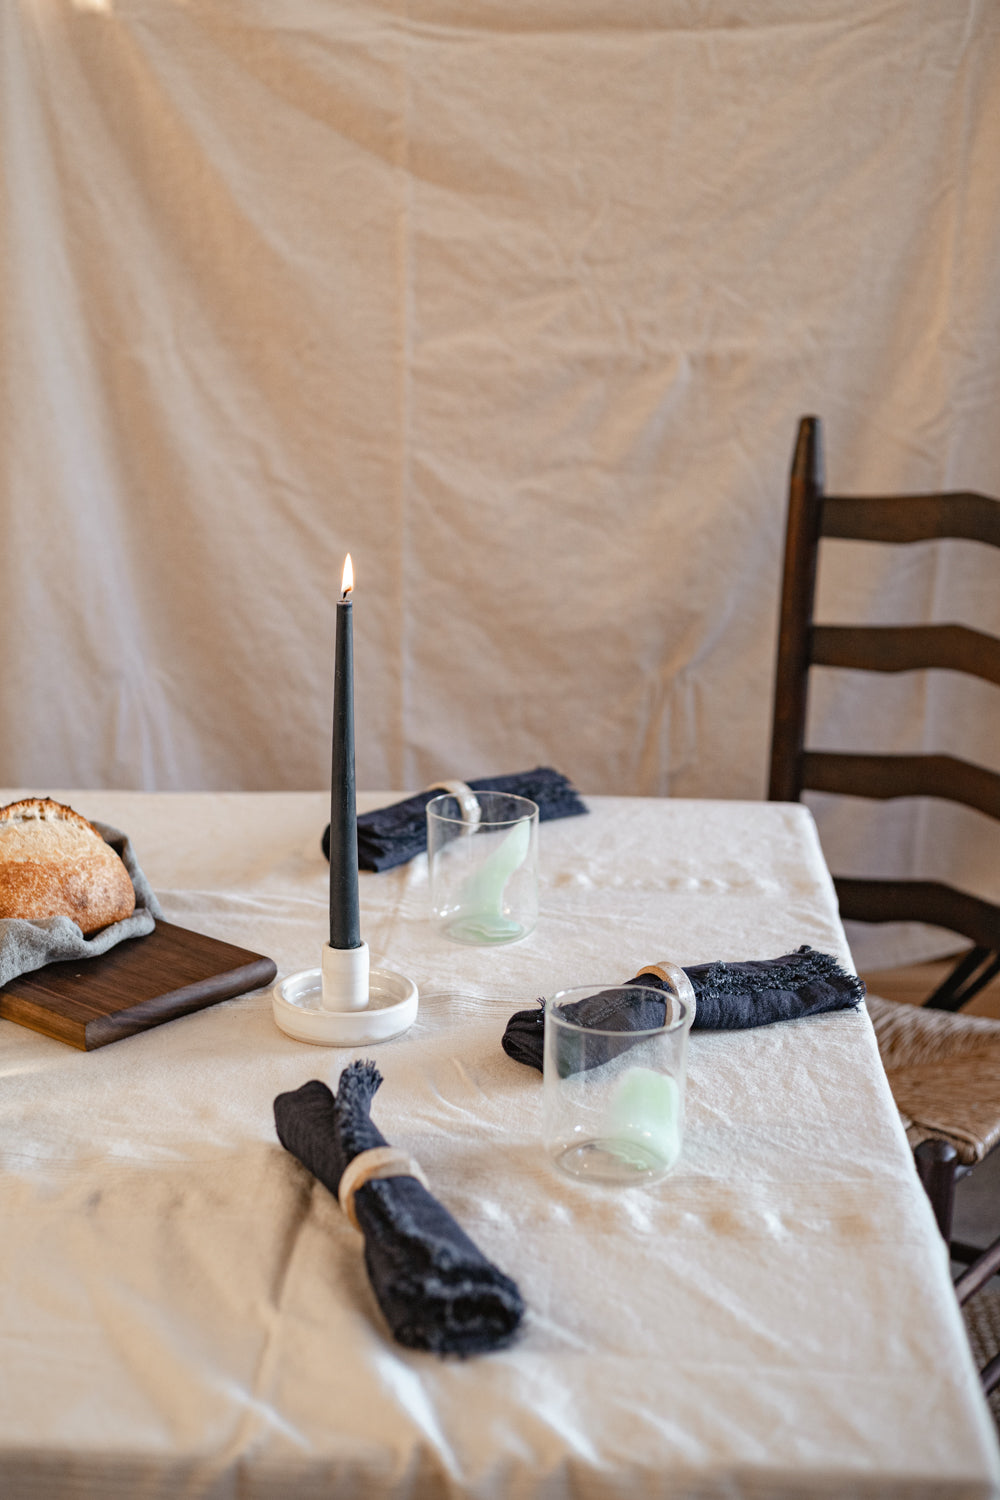 10-inch tall smooth taper candle shown in dinner table setting